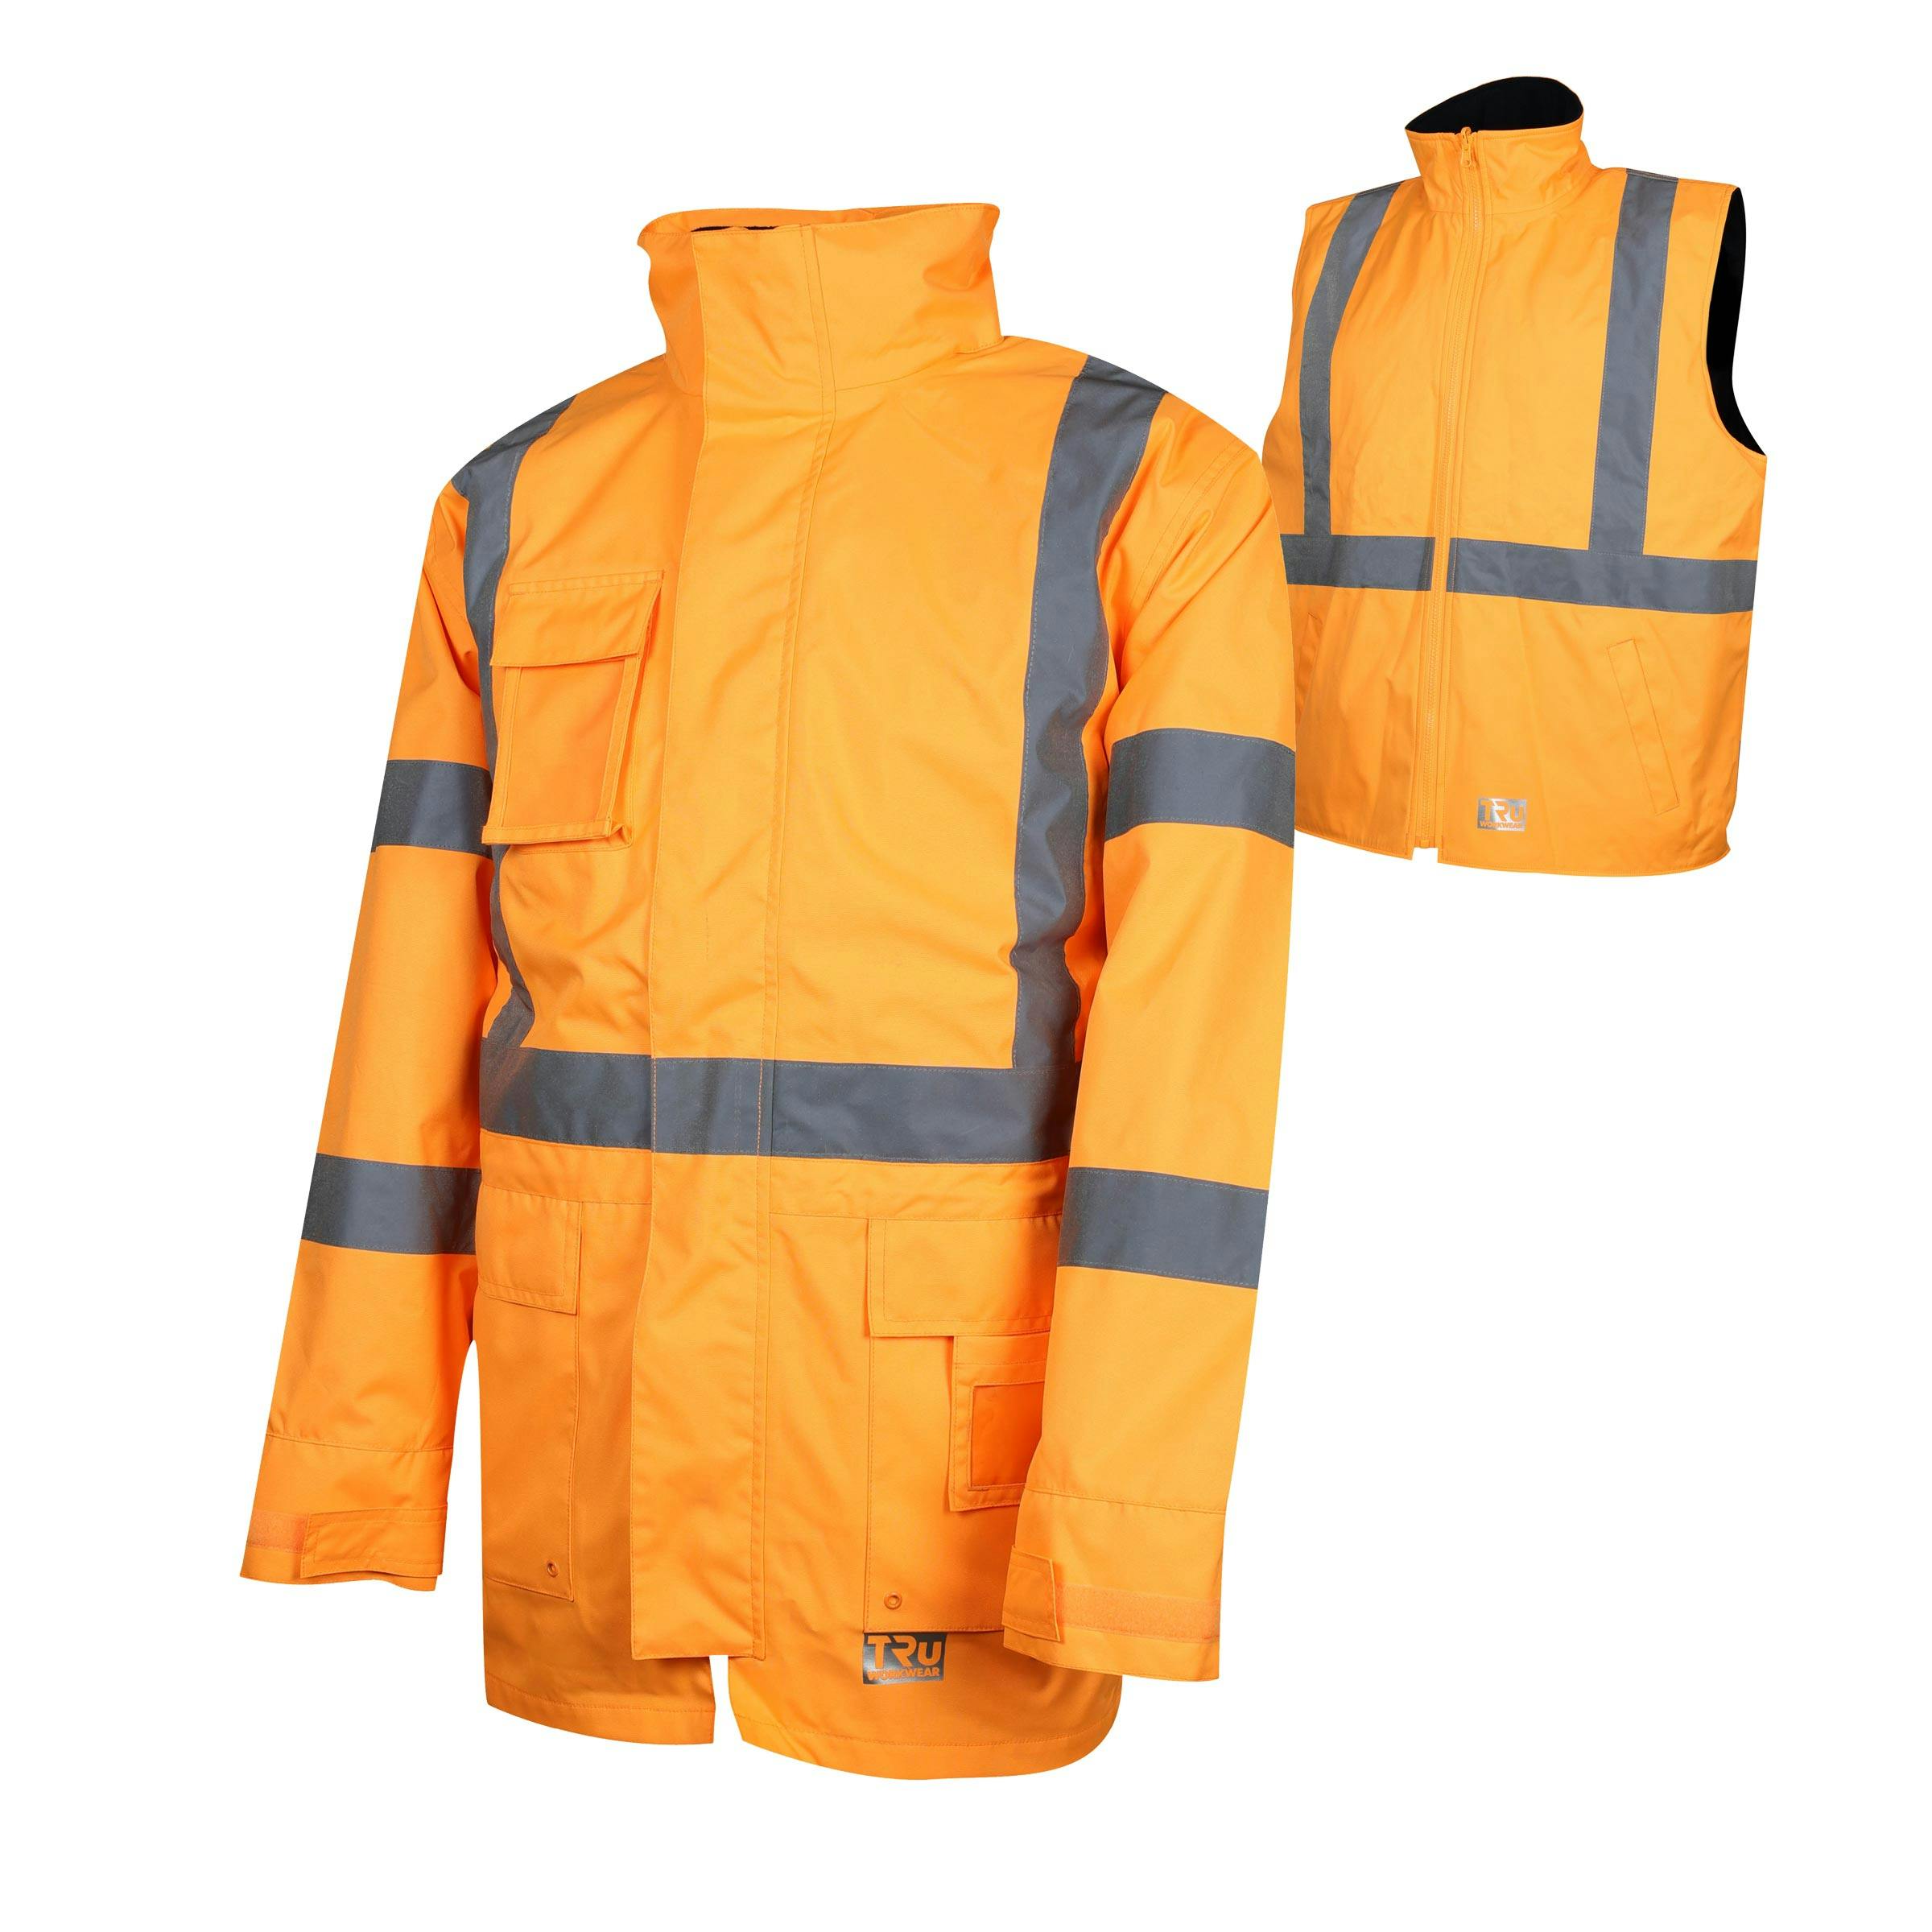 TRu Workwear Jacket 4 In 1 With Vest Poly Oxford With  Reflective Tape To T5 Pattern (X Back)